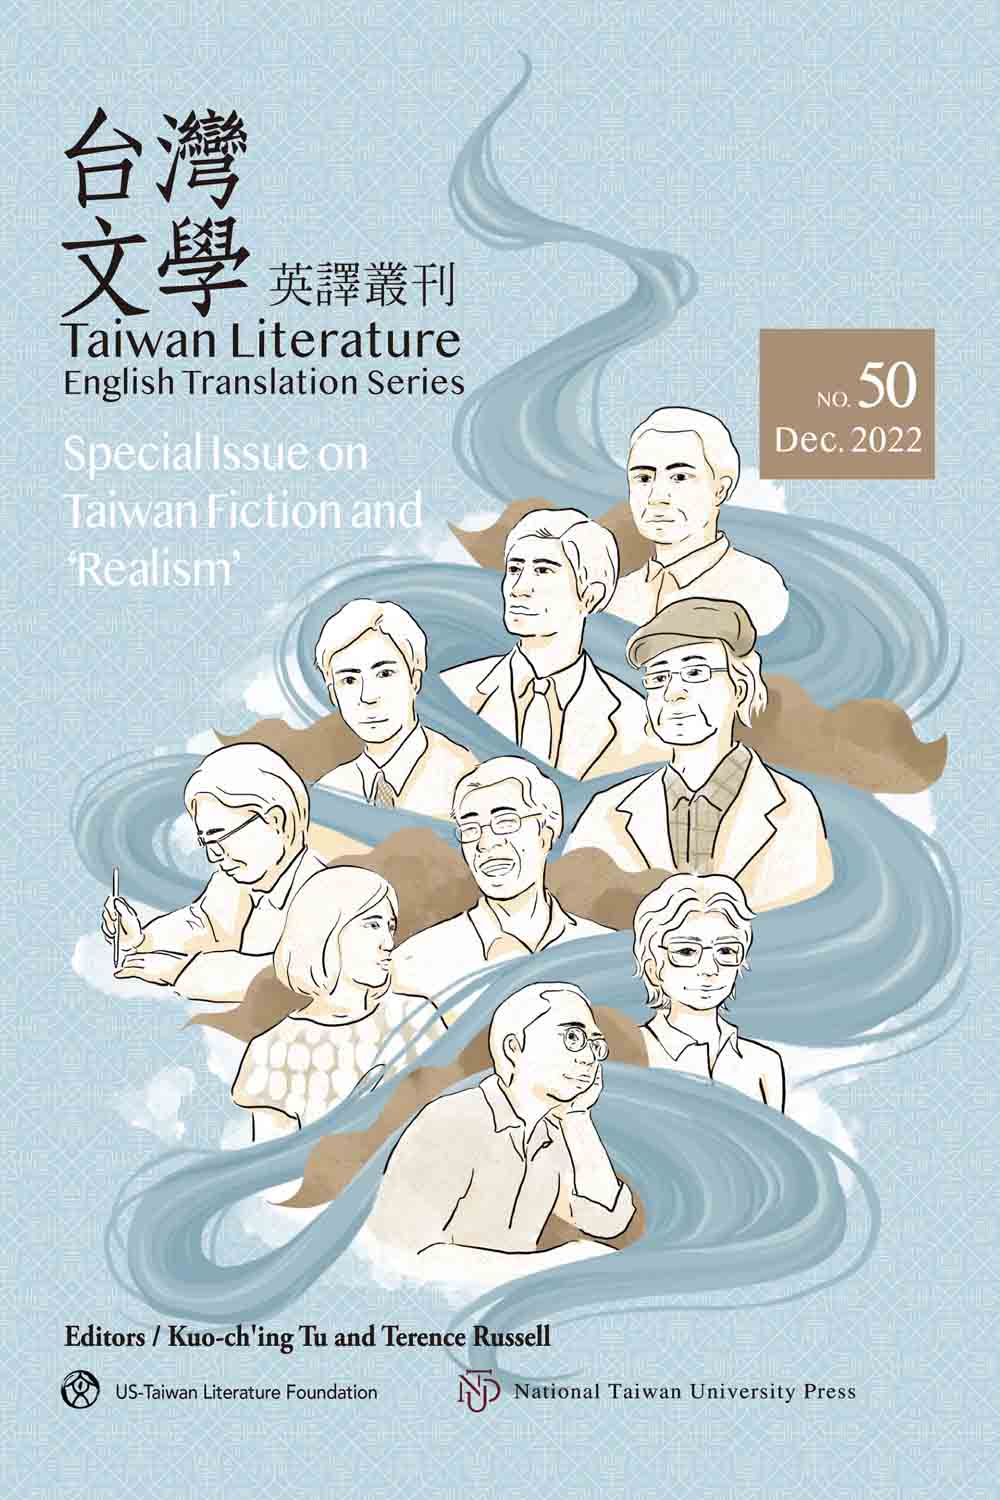 Taiwan Literature: English Translation Series, No. 50 (Special Issue on Taiwan Fiction and ‘Realism’)